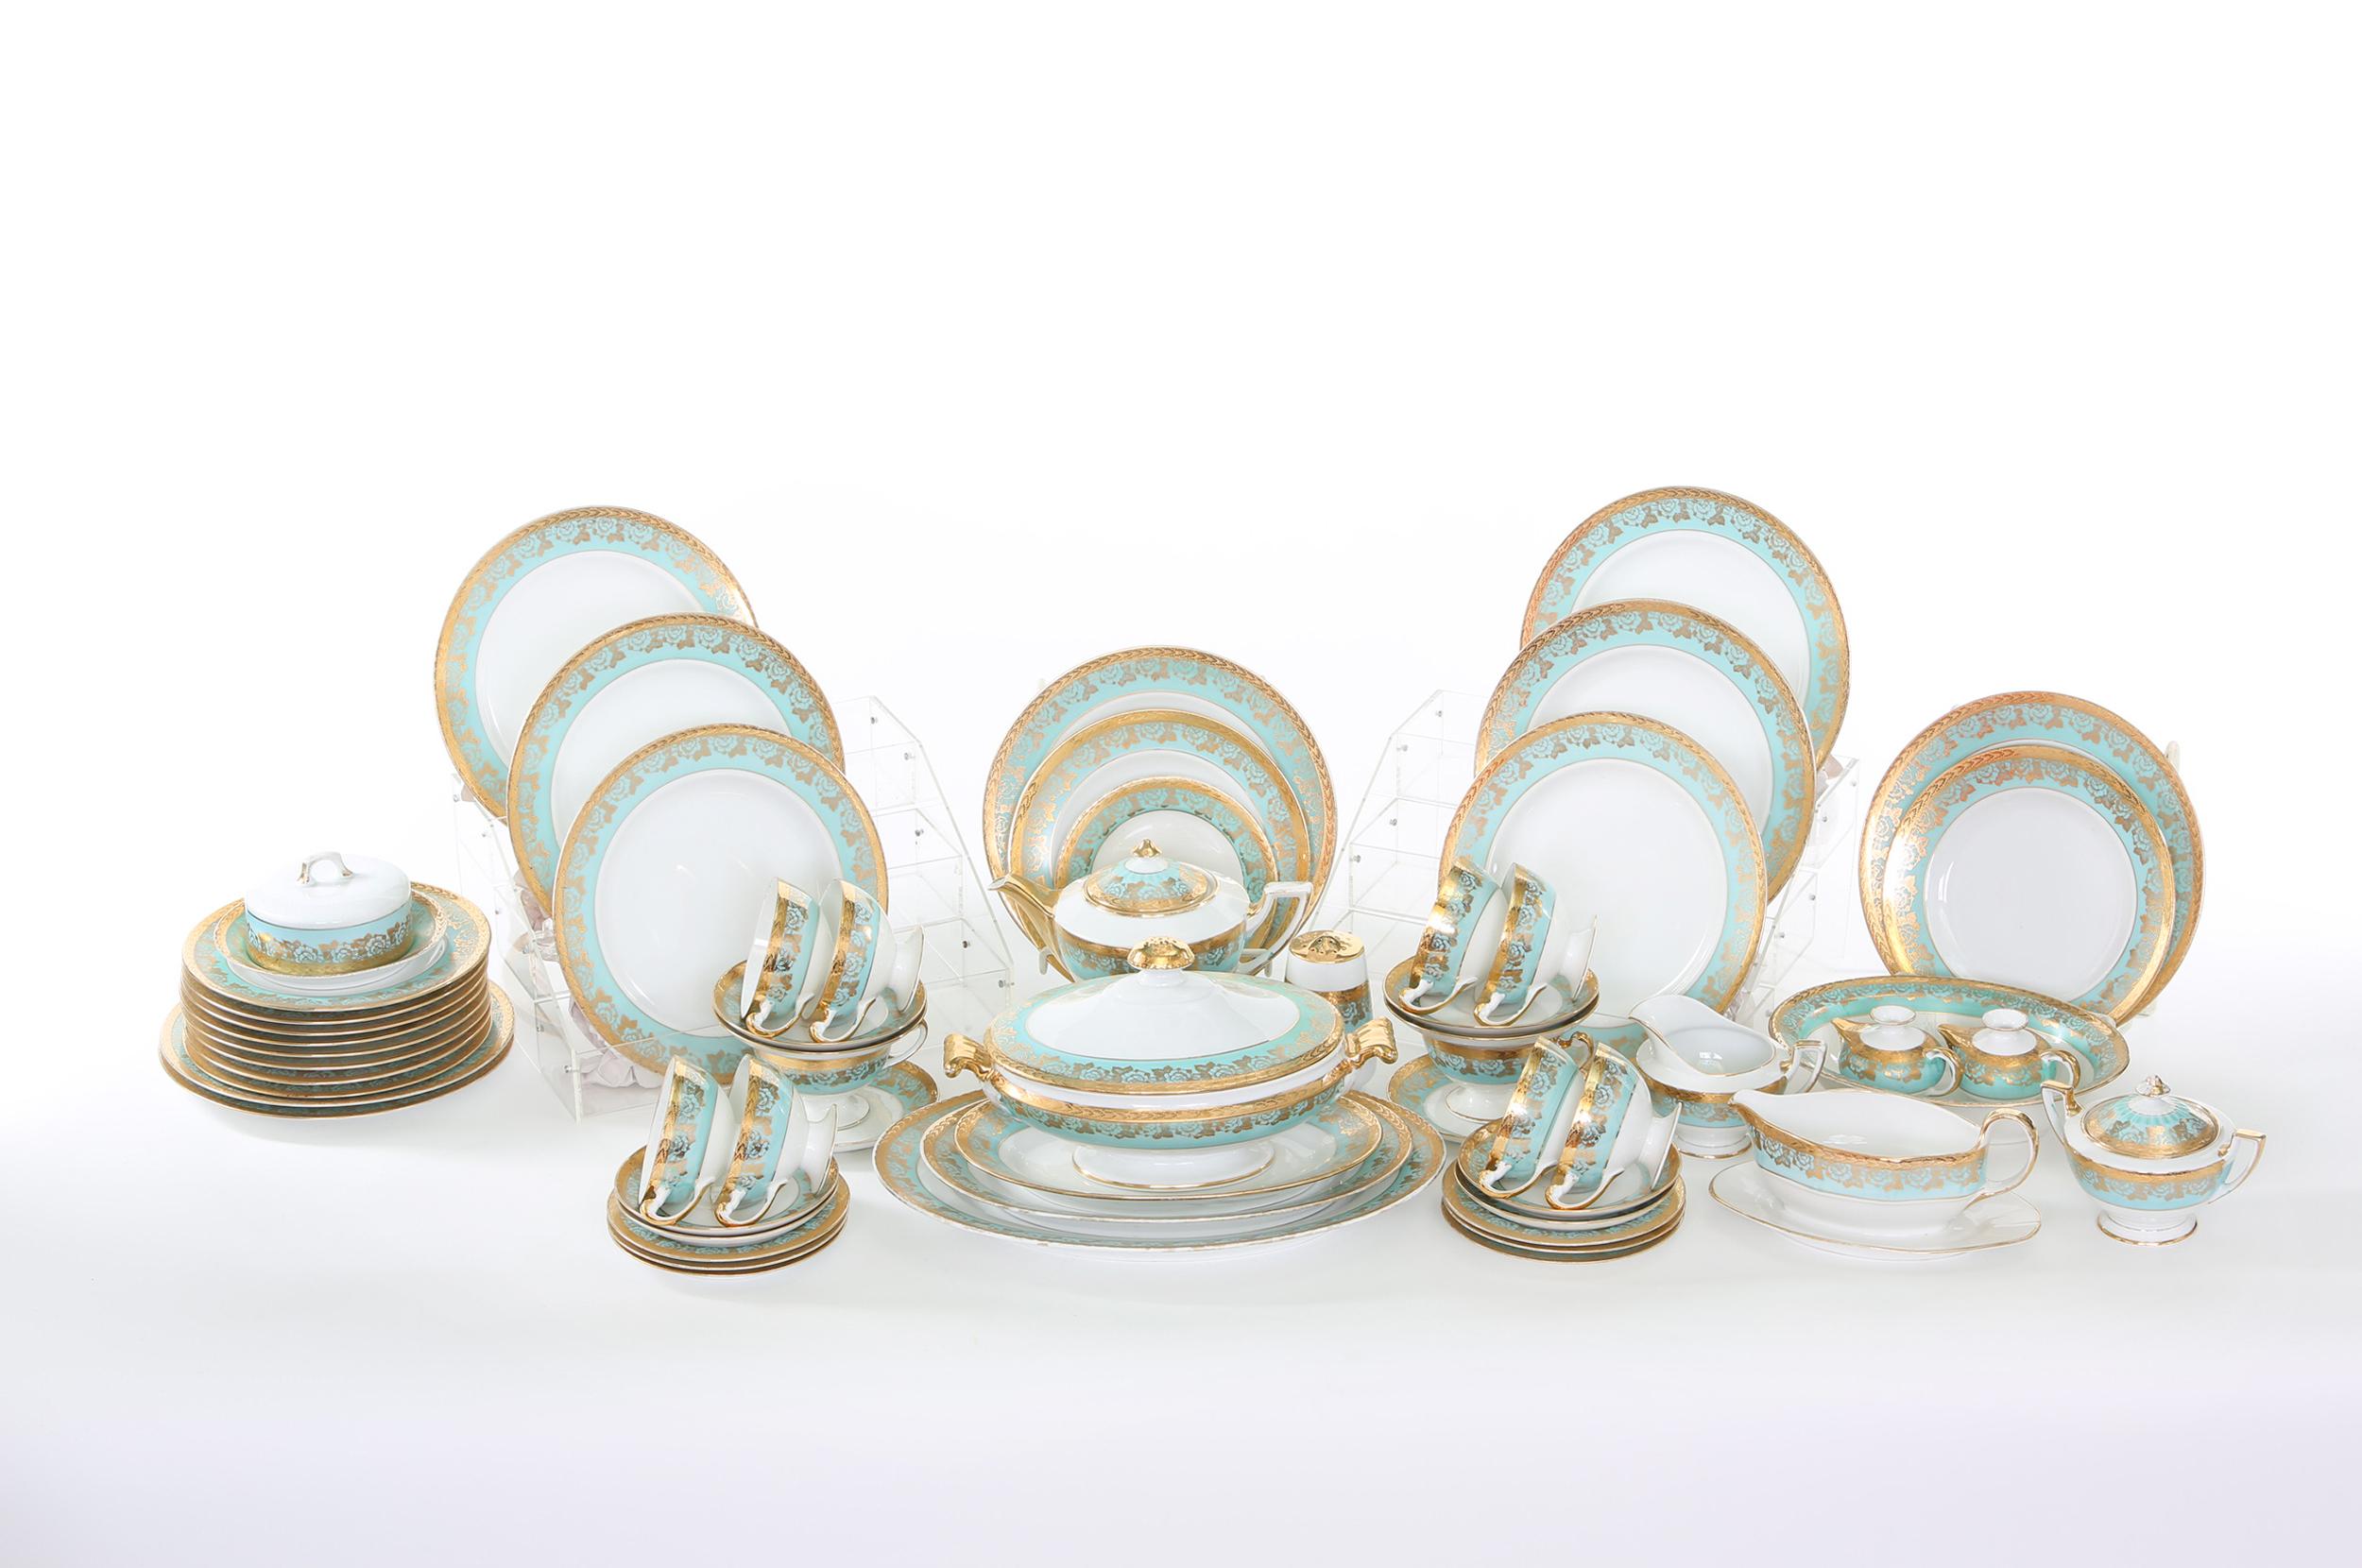 19th Century German Porcelain / Gold Dinner Service For Ten People